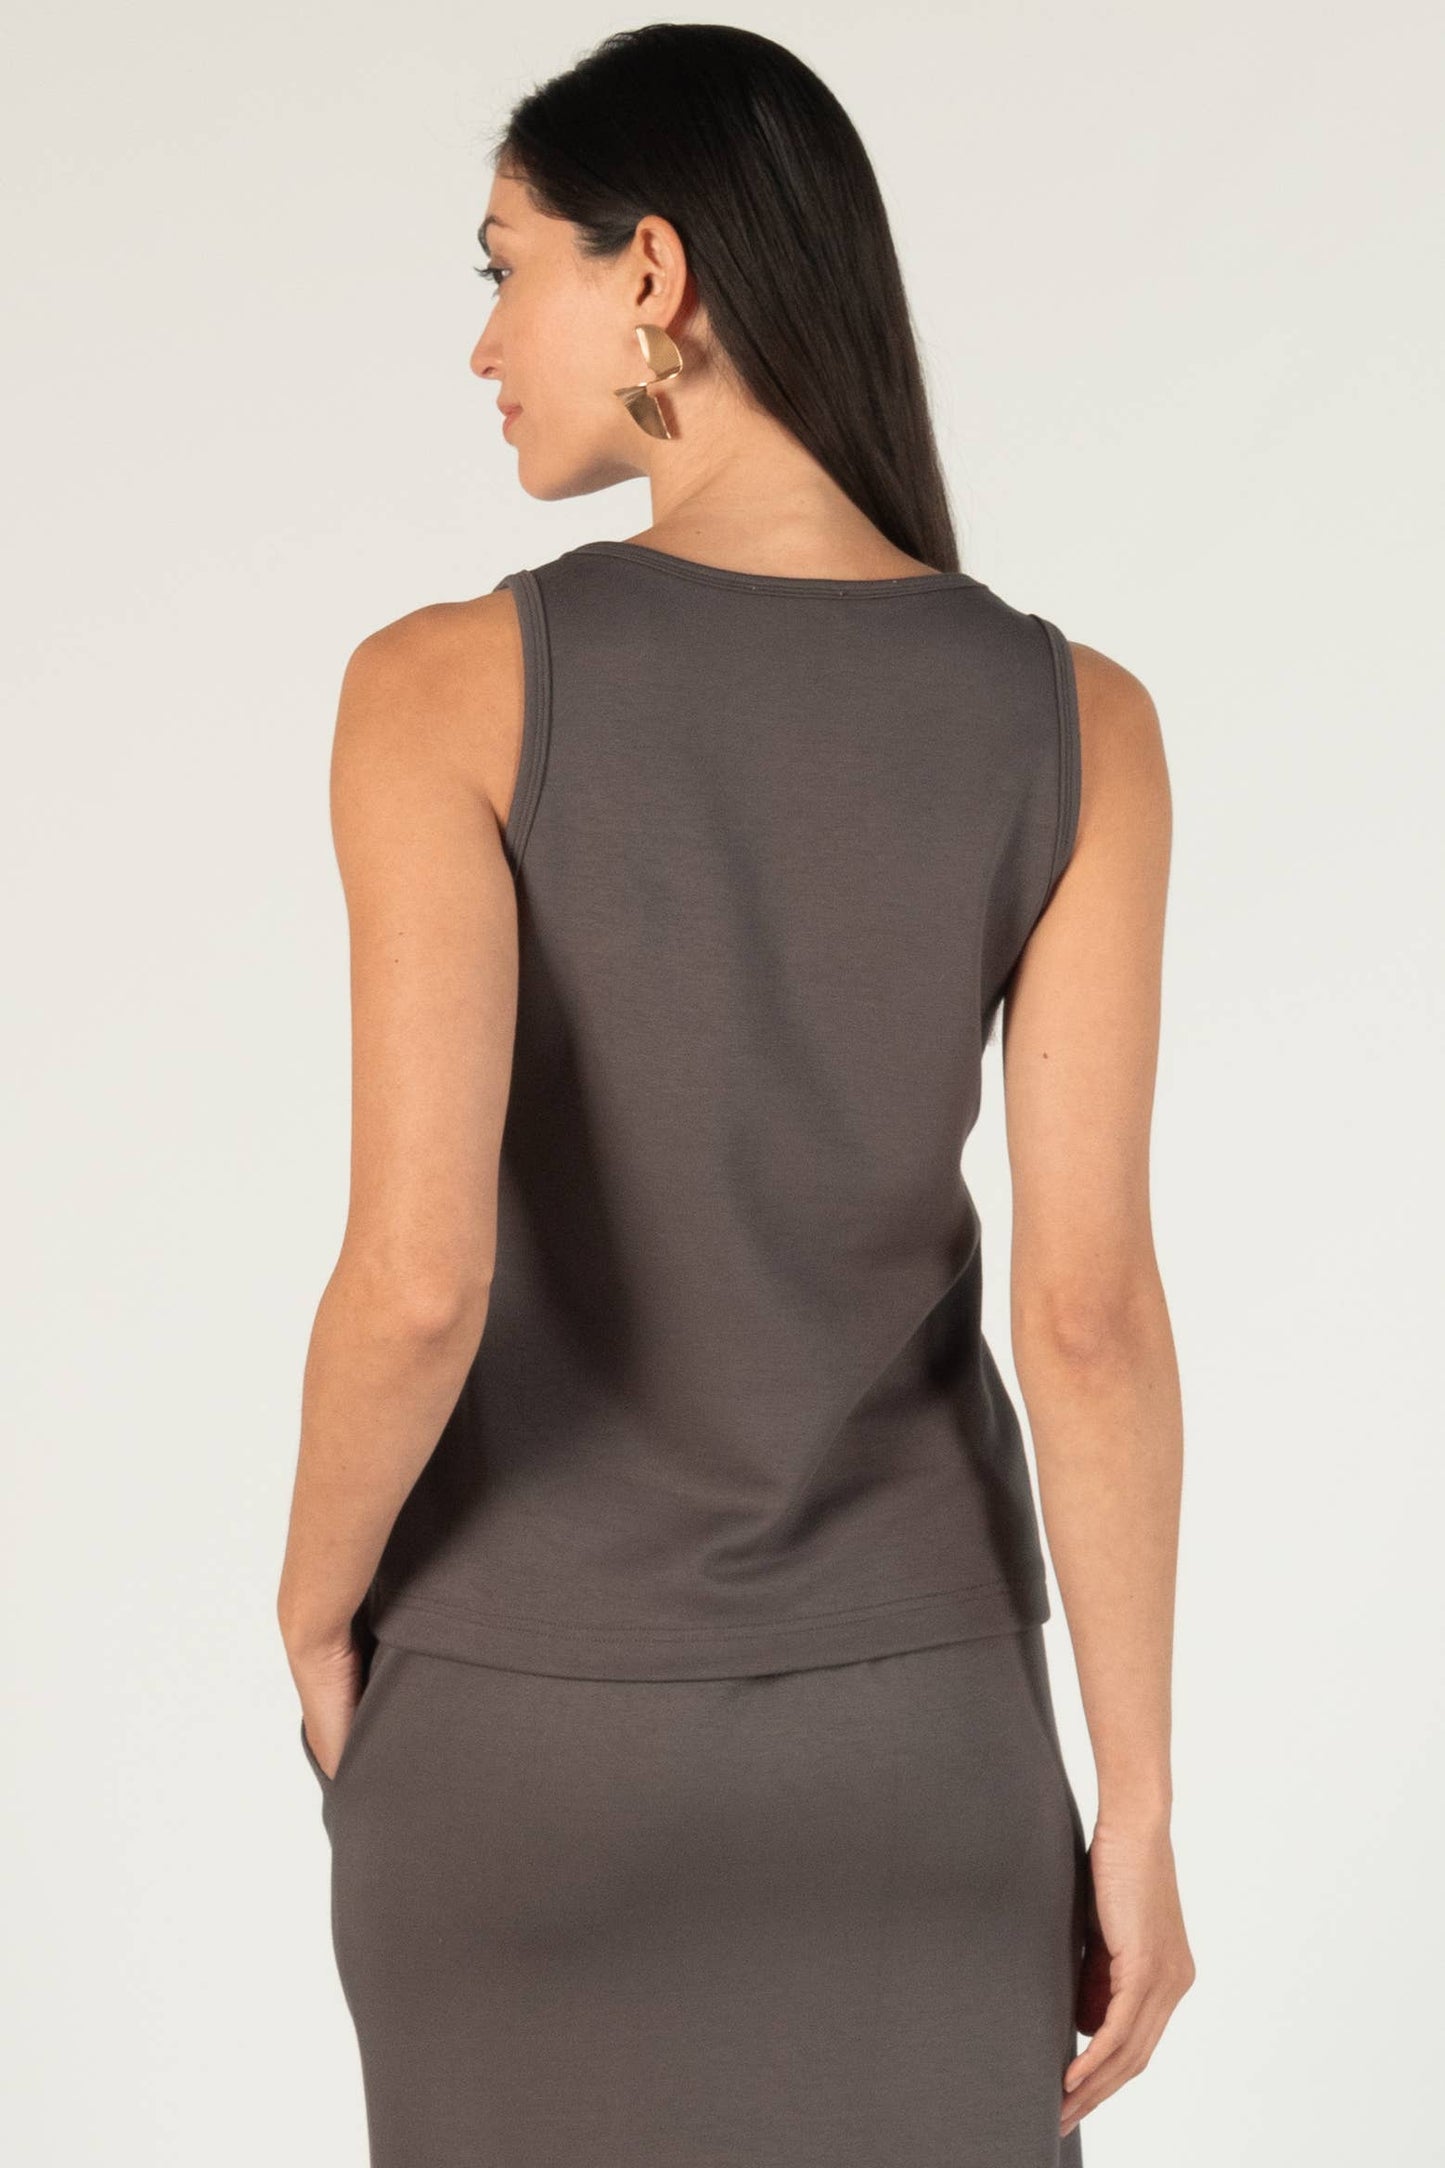 P. Cill Butter Modal Simple Tank (Spanx Air Essentials Material Dupe)